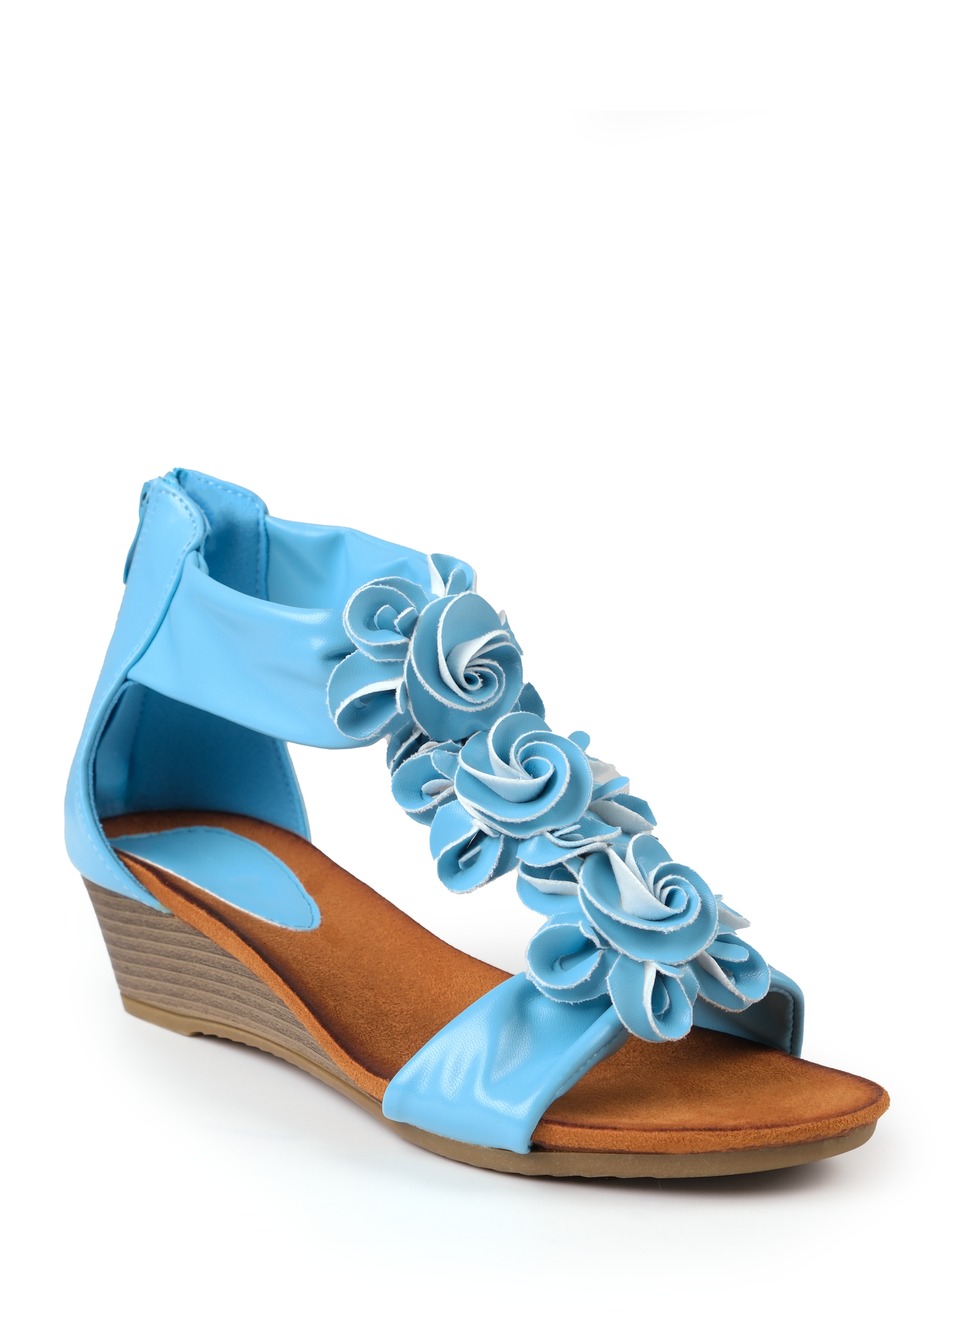 Where's That From Blue Pu Abilene Low Wedge Heel Sandals